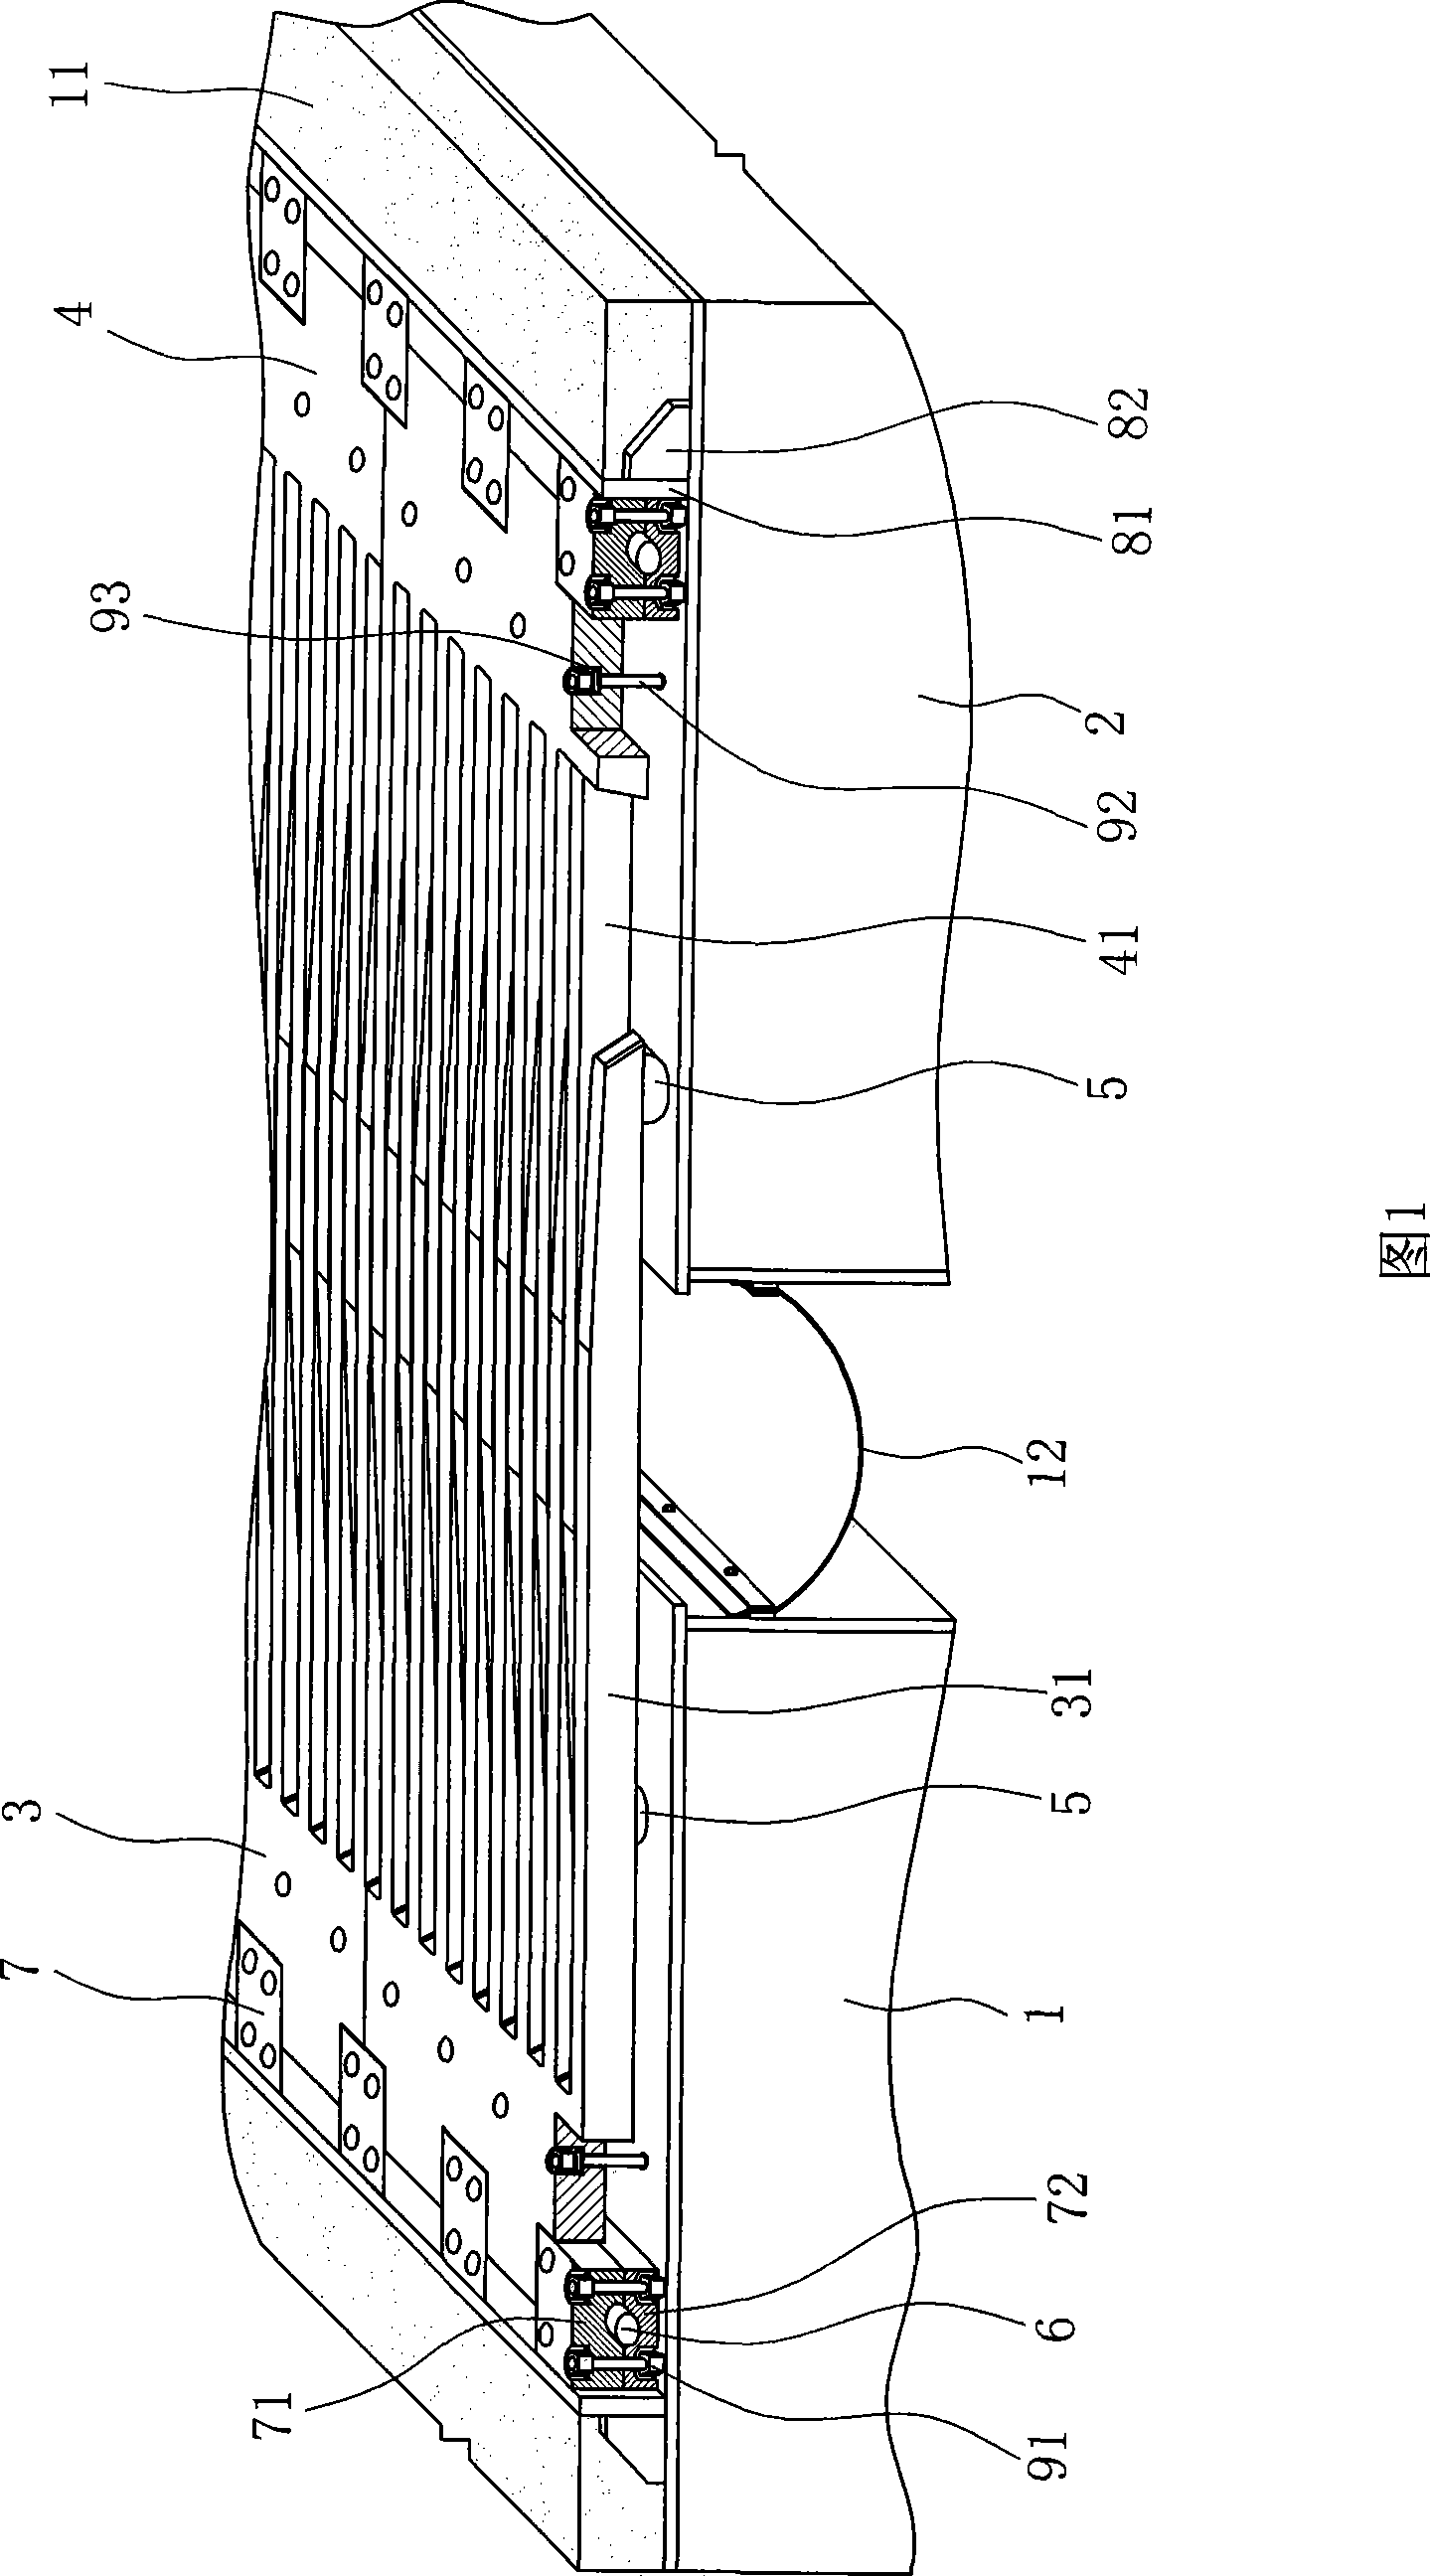 Bridge expansion joint device preventing extra large vertical rotation angle displacement